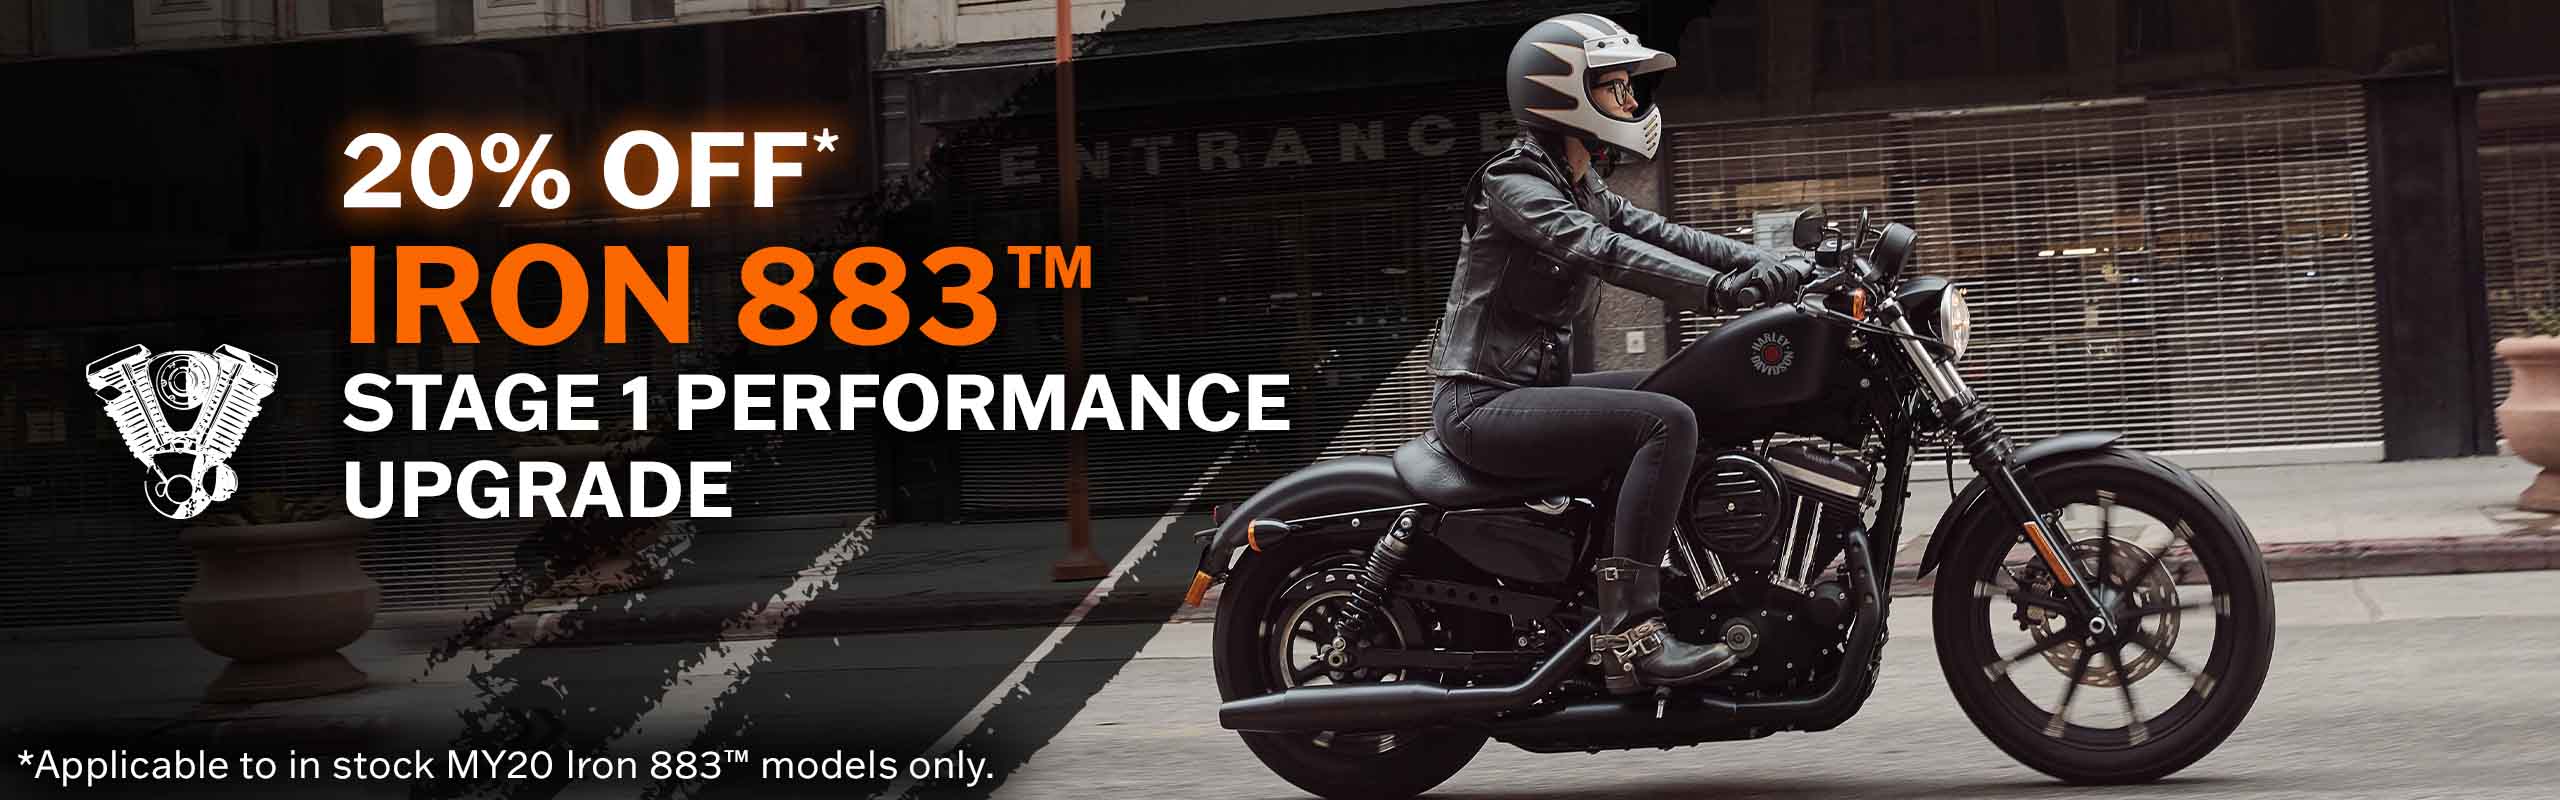 Iron 883 Stage 1 Performance Upgrade Offer